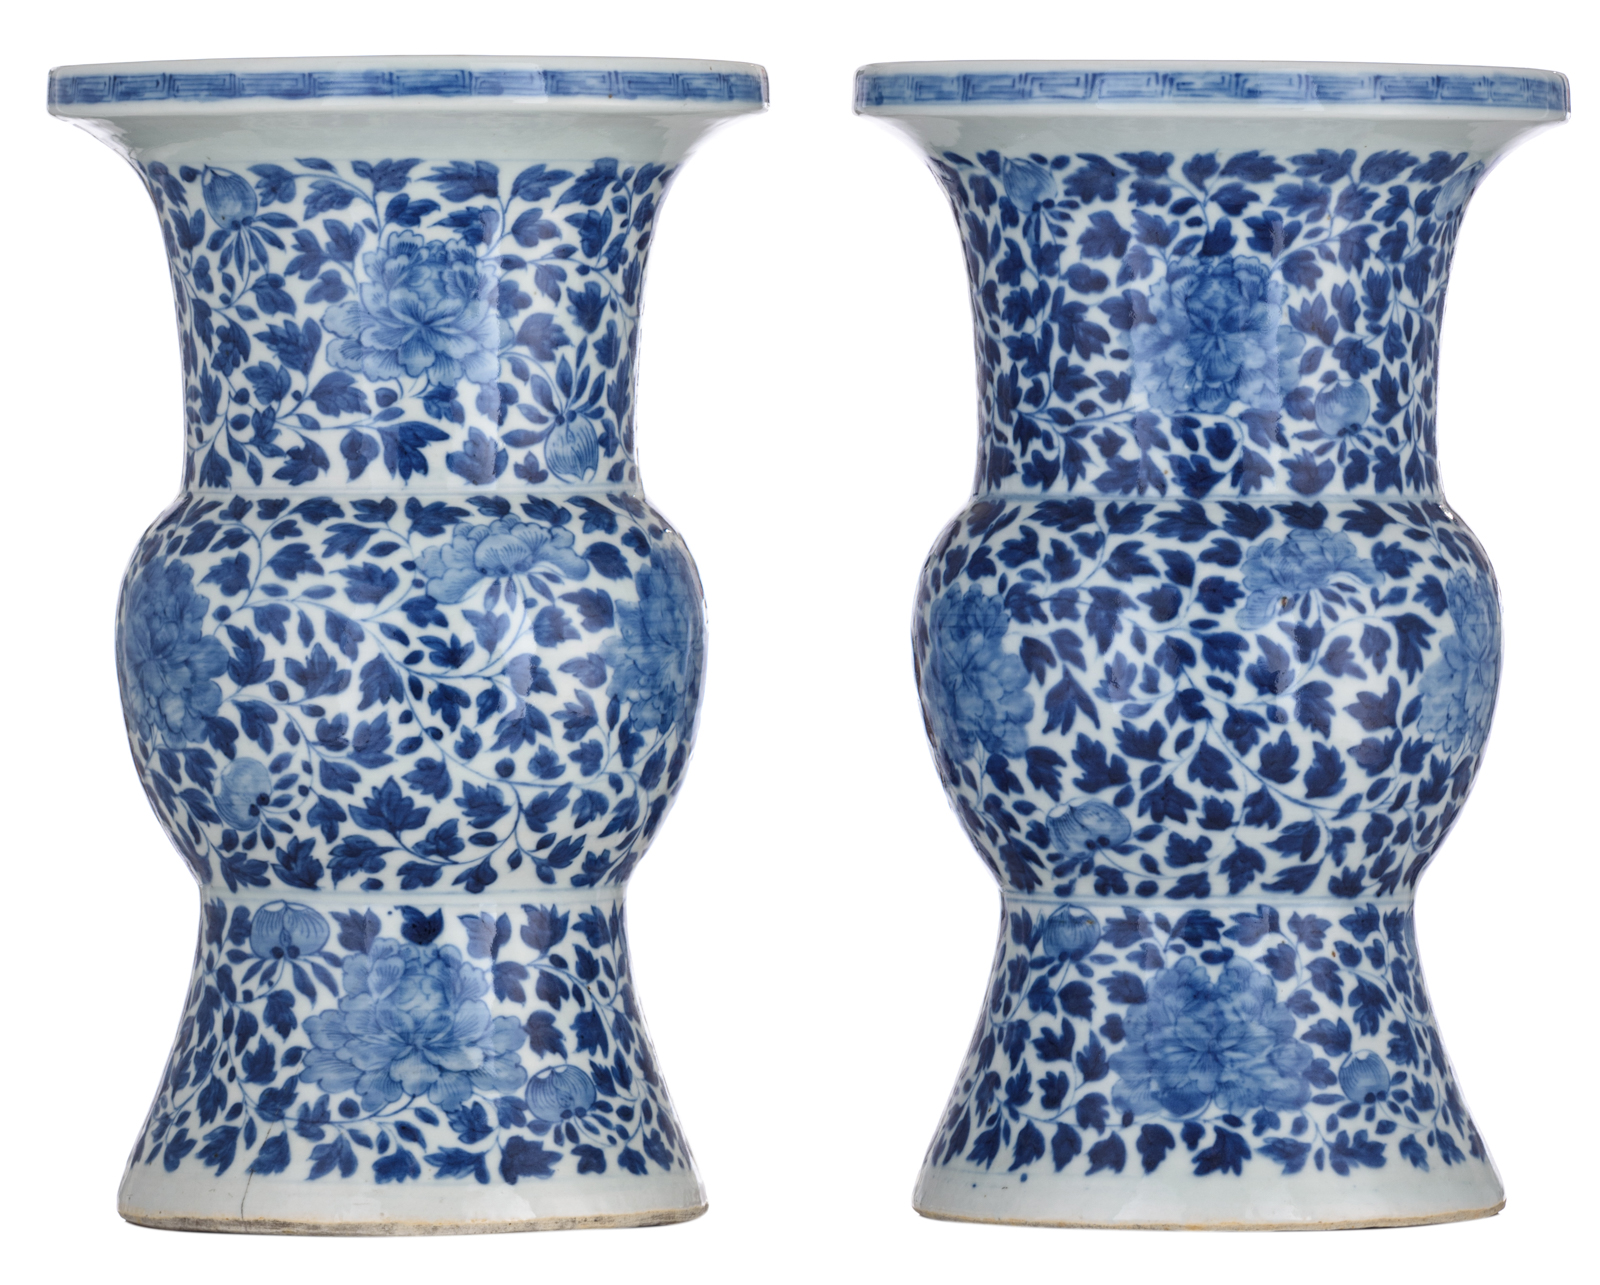 A pair of Chinese blue and white floral decorated Gu vases, 19thC, H 40,5 cm